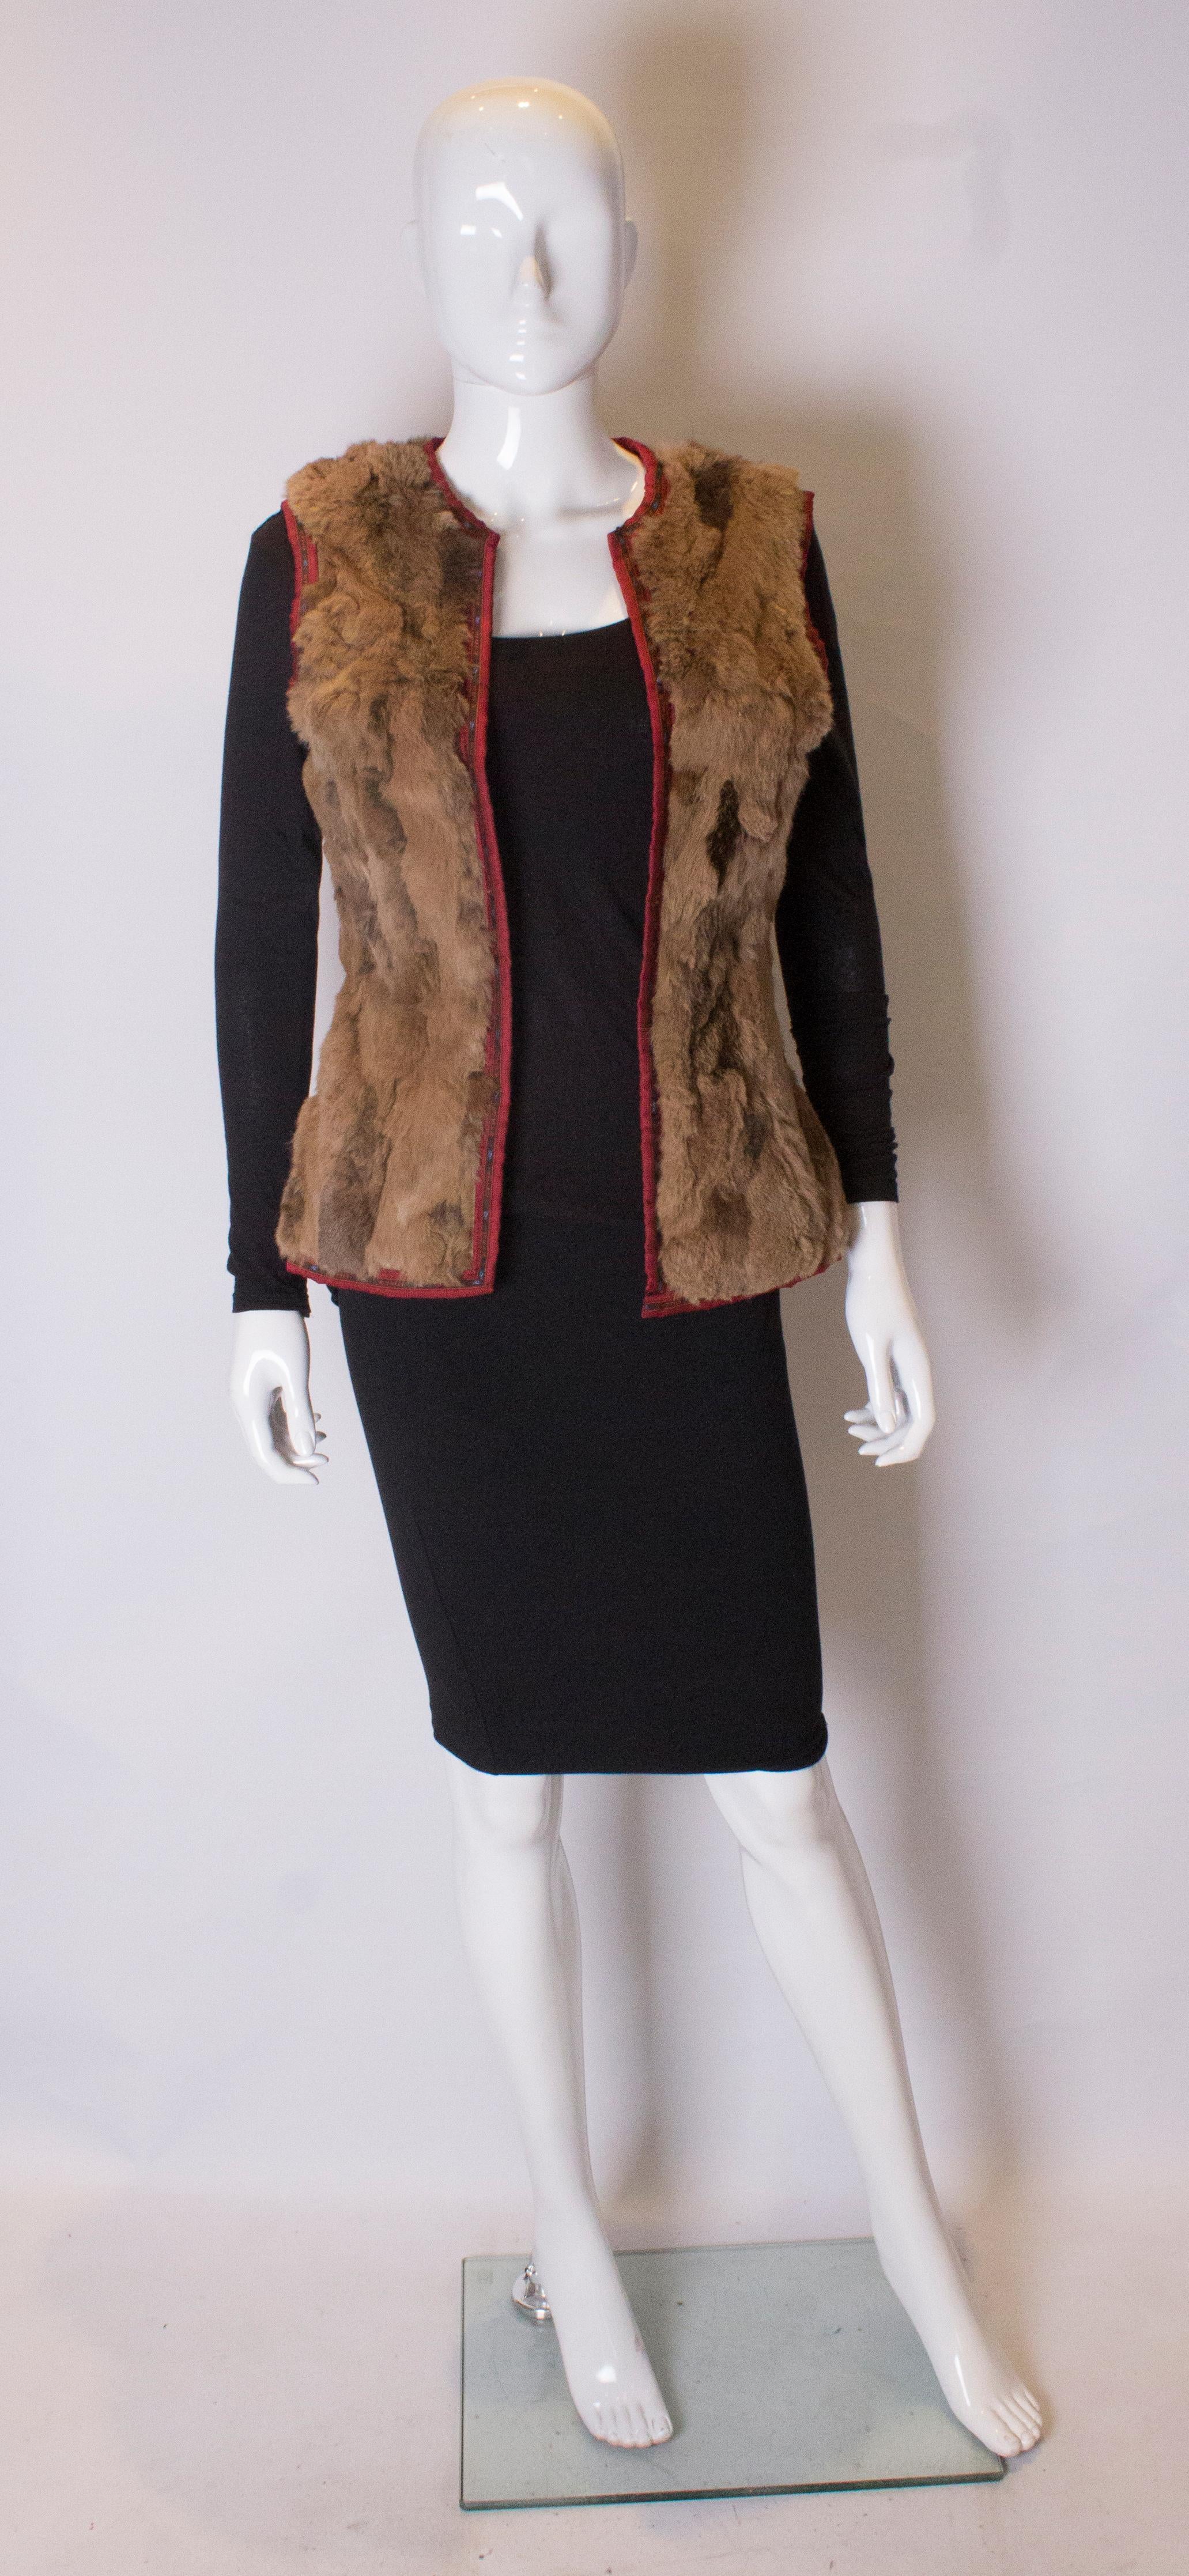 A chic and warm rabbit fur gilet by Etro. The gilet is lined in brown fabric and edged with Etro banding.